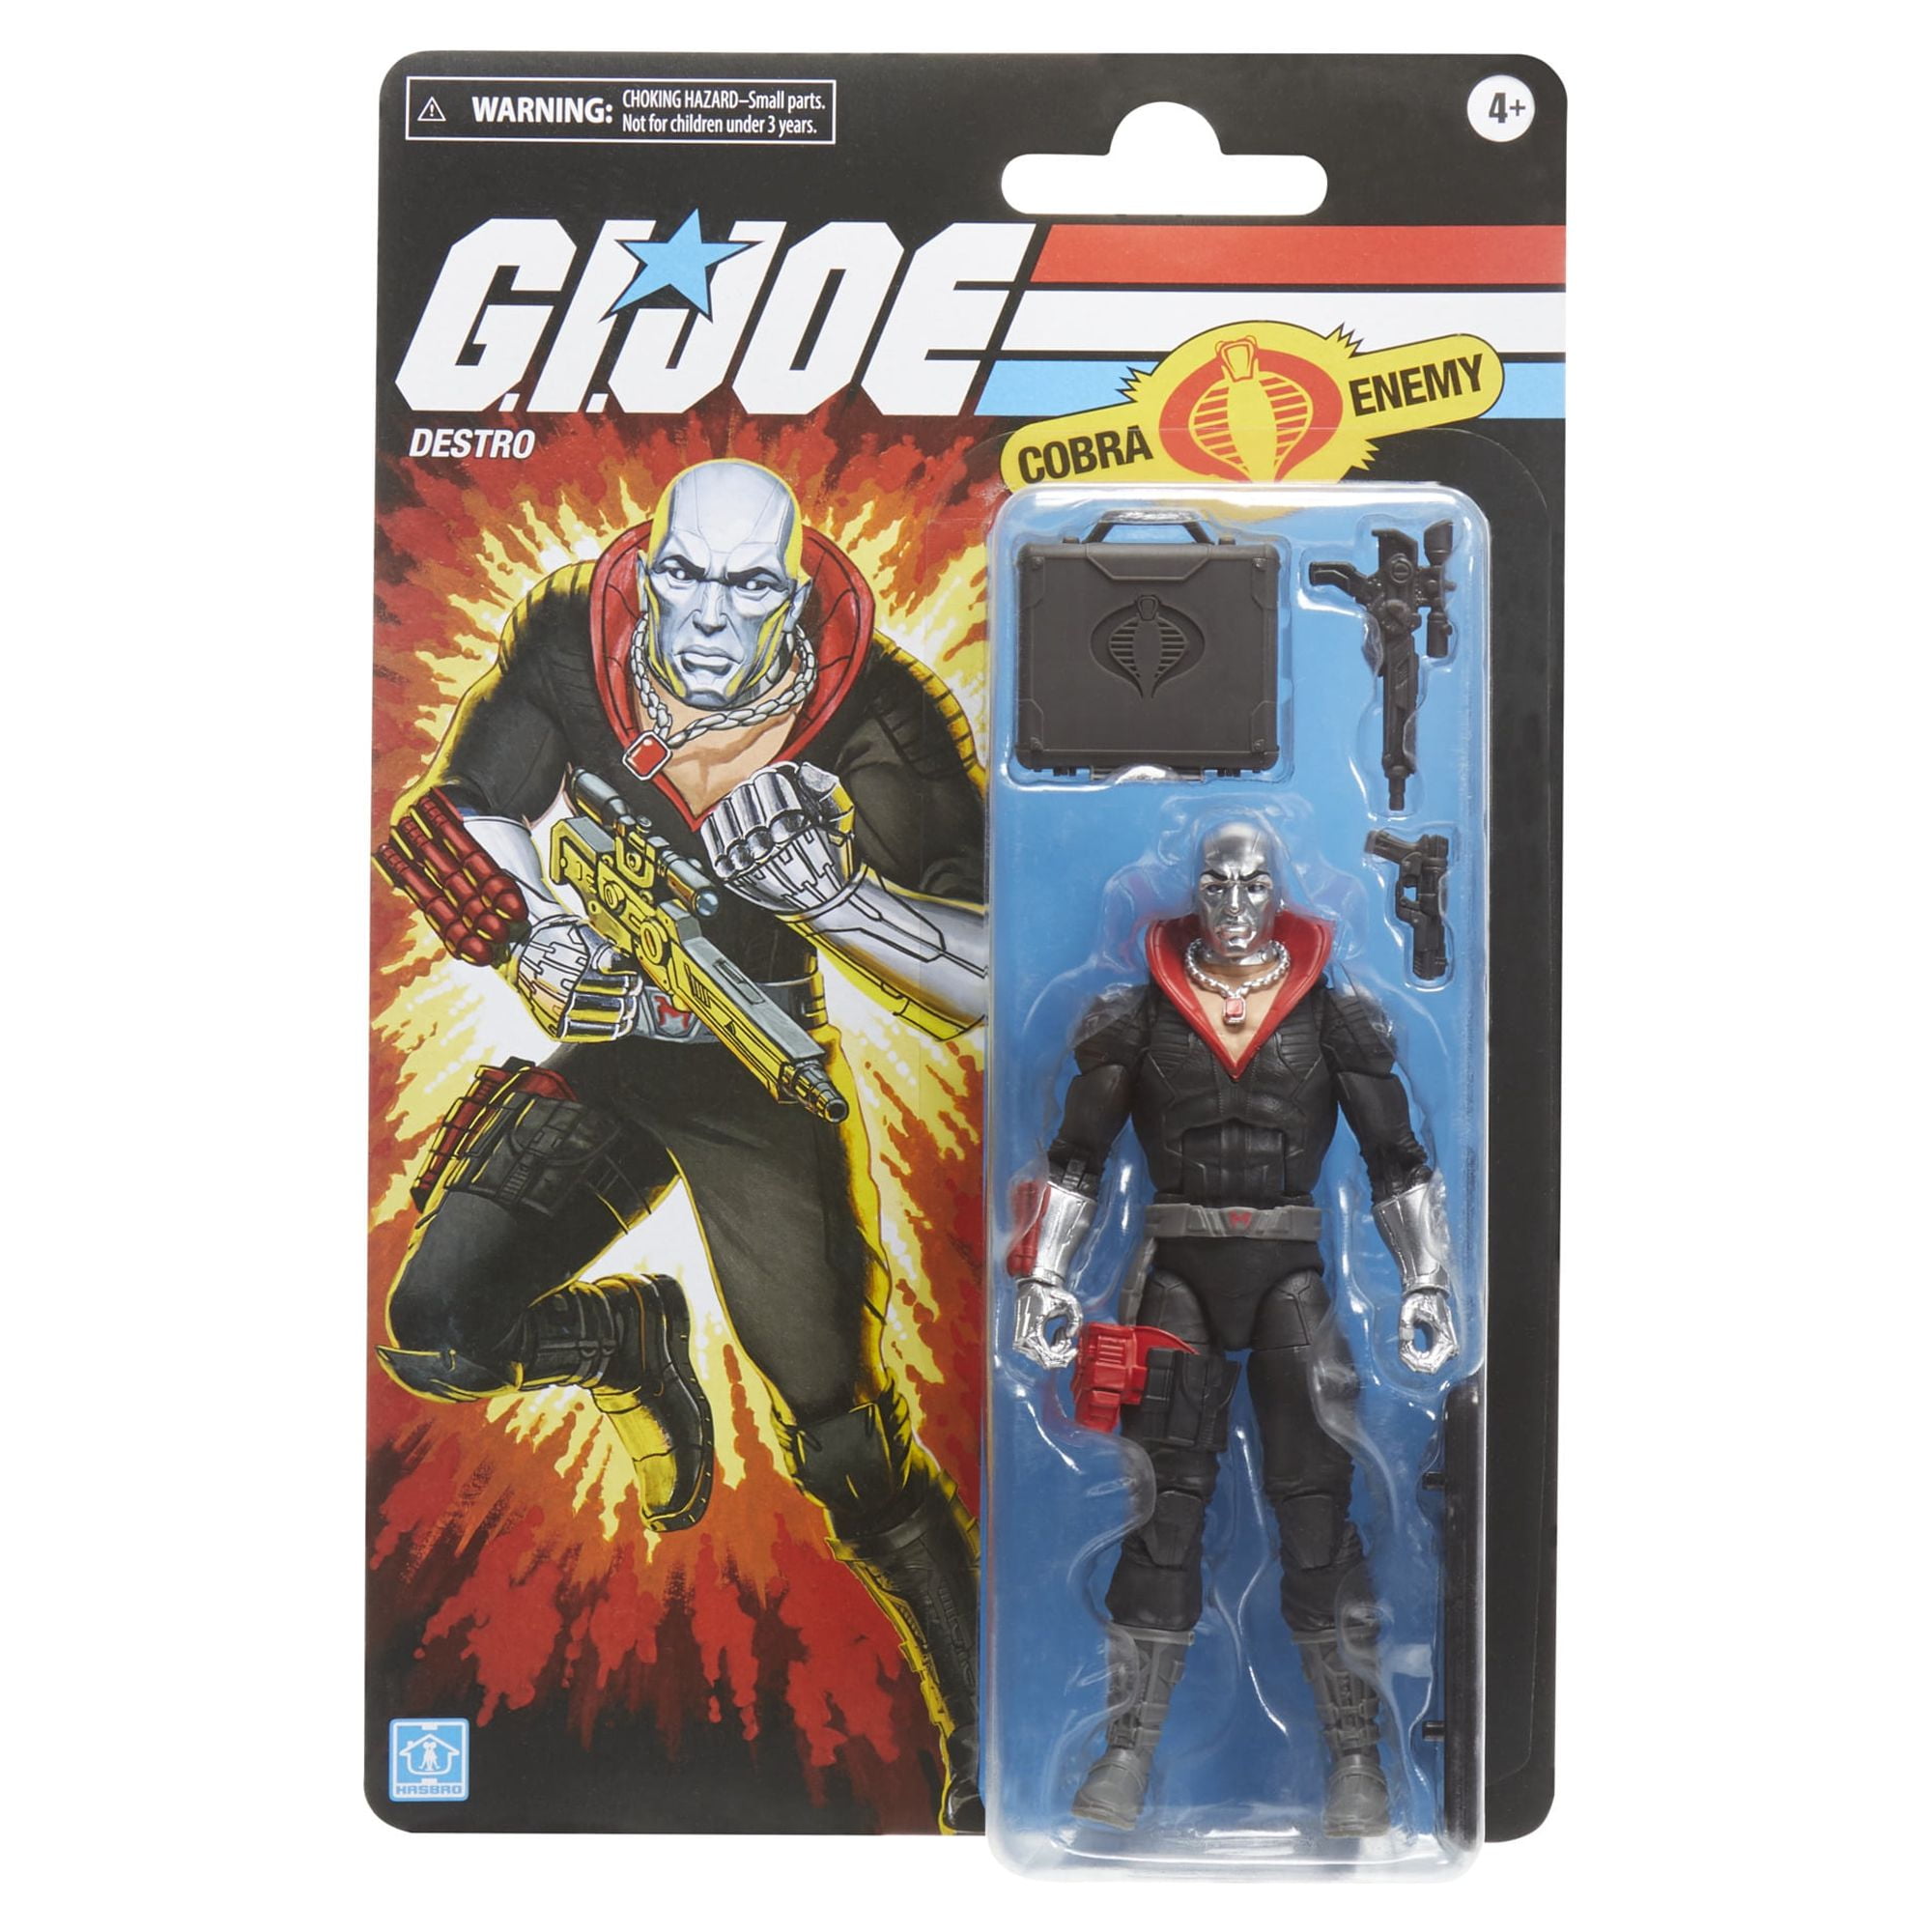  G.I. Joe Classified Series Arctic B.A.T., Collectible G.I. Joe Action  Figures, 69, 6-Inch Action Figures for Boys & Girls, with 8 Accessories :  Toys & Games